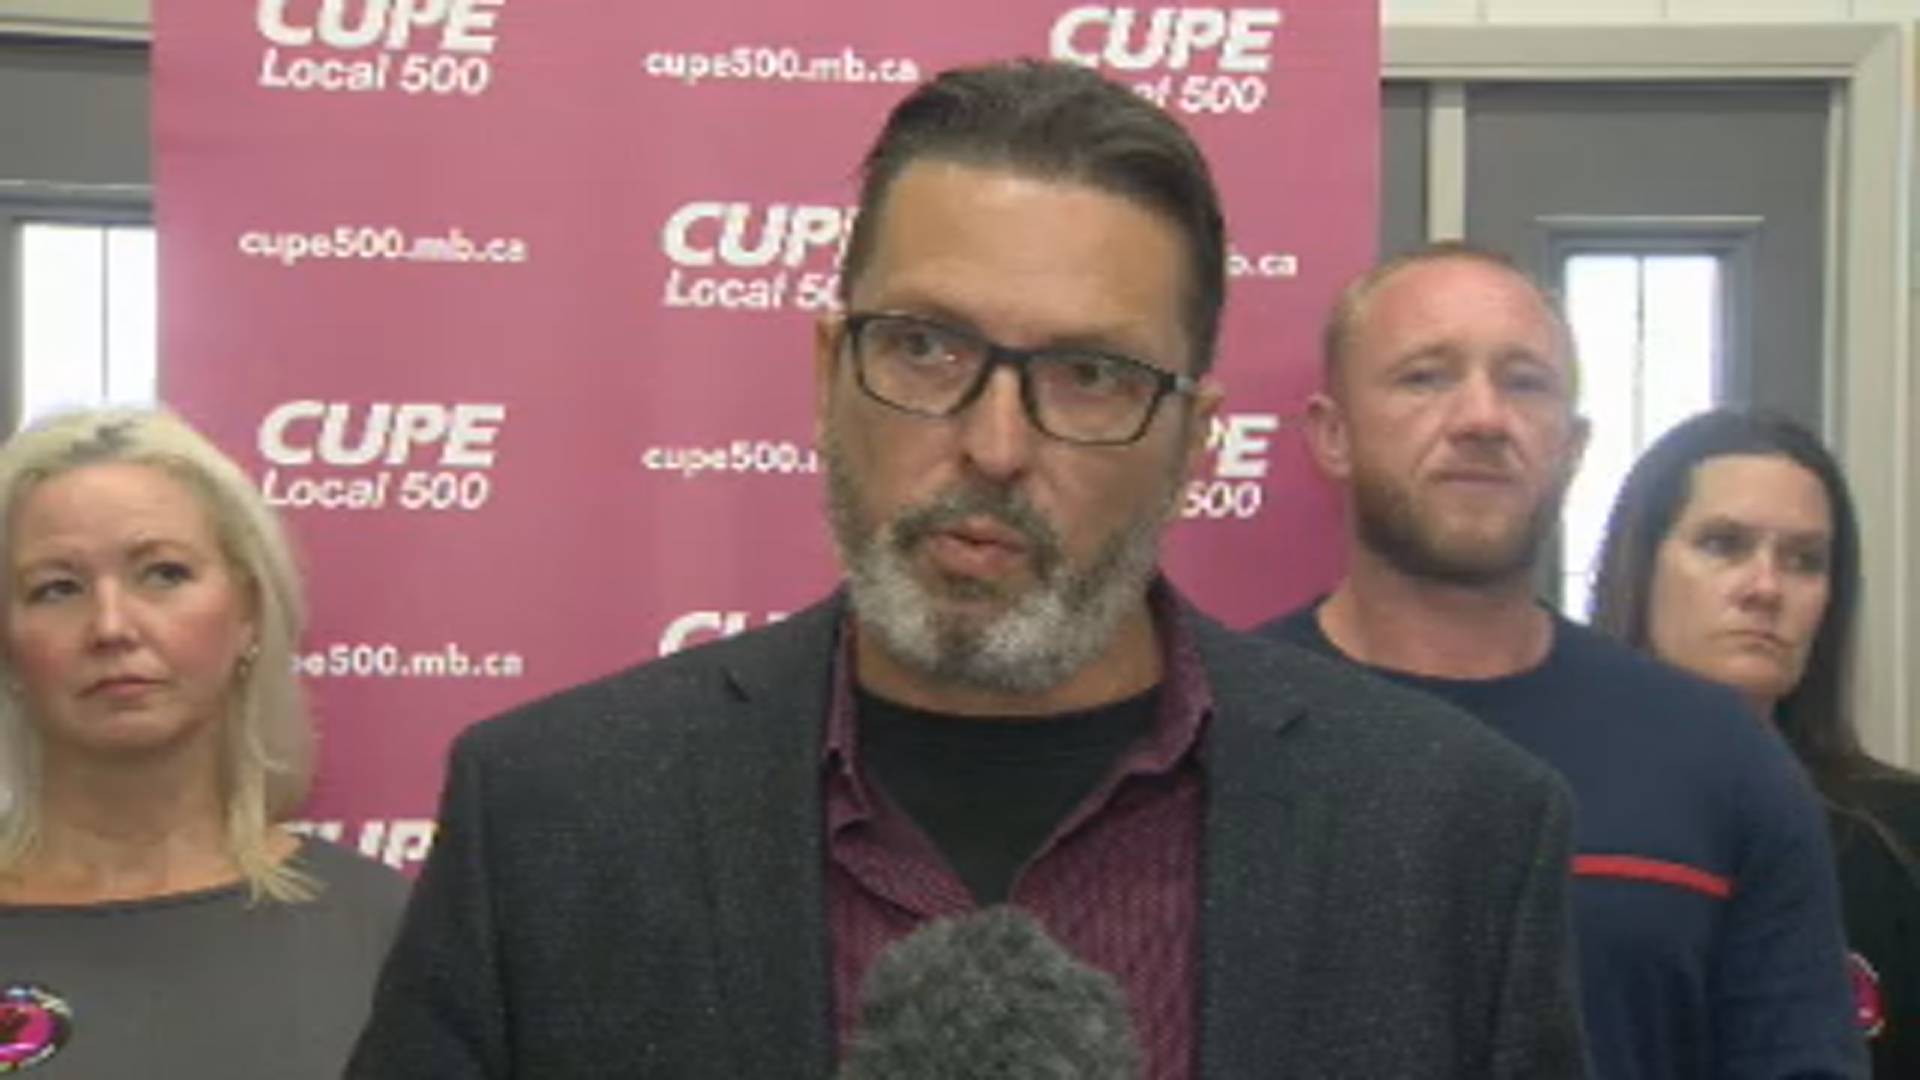 City and CUPE Local 500 reach tentative agreement Tuesday night - Winnipeg